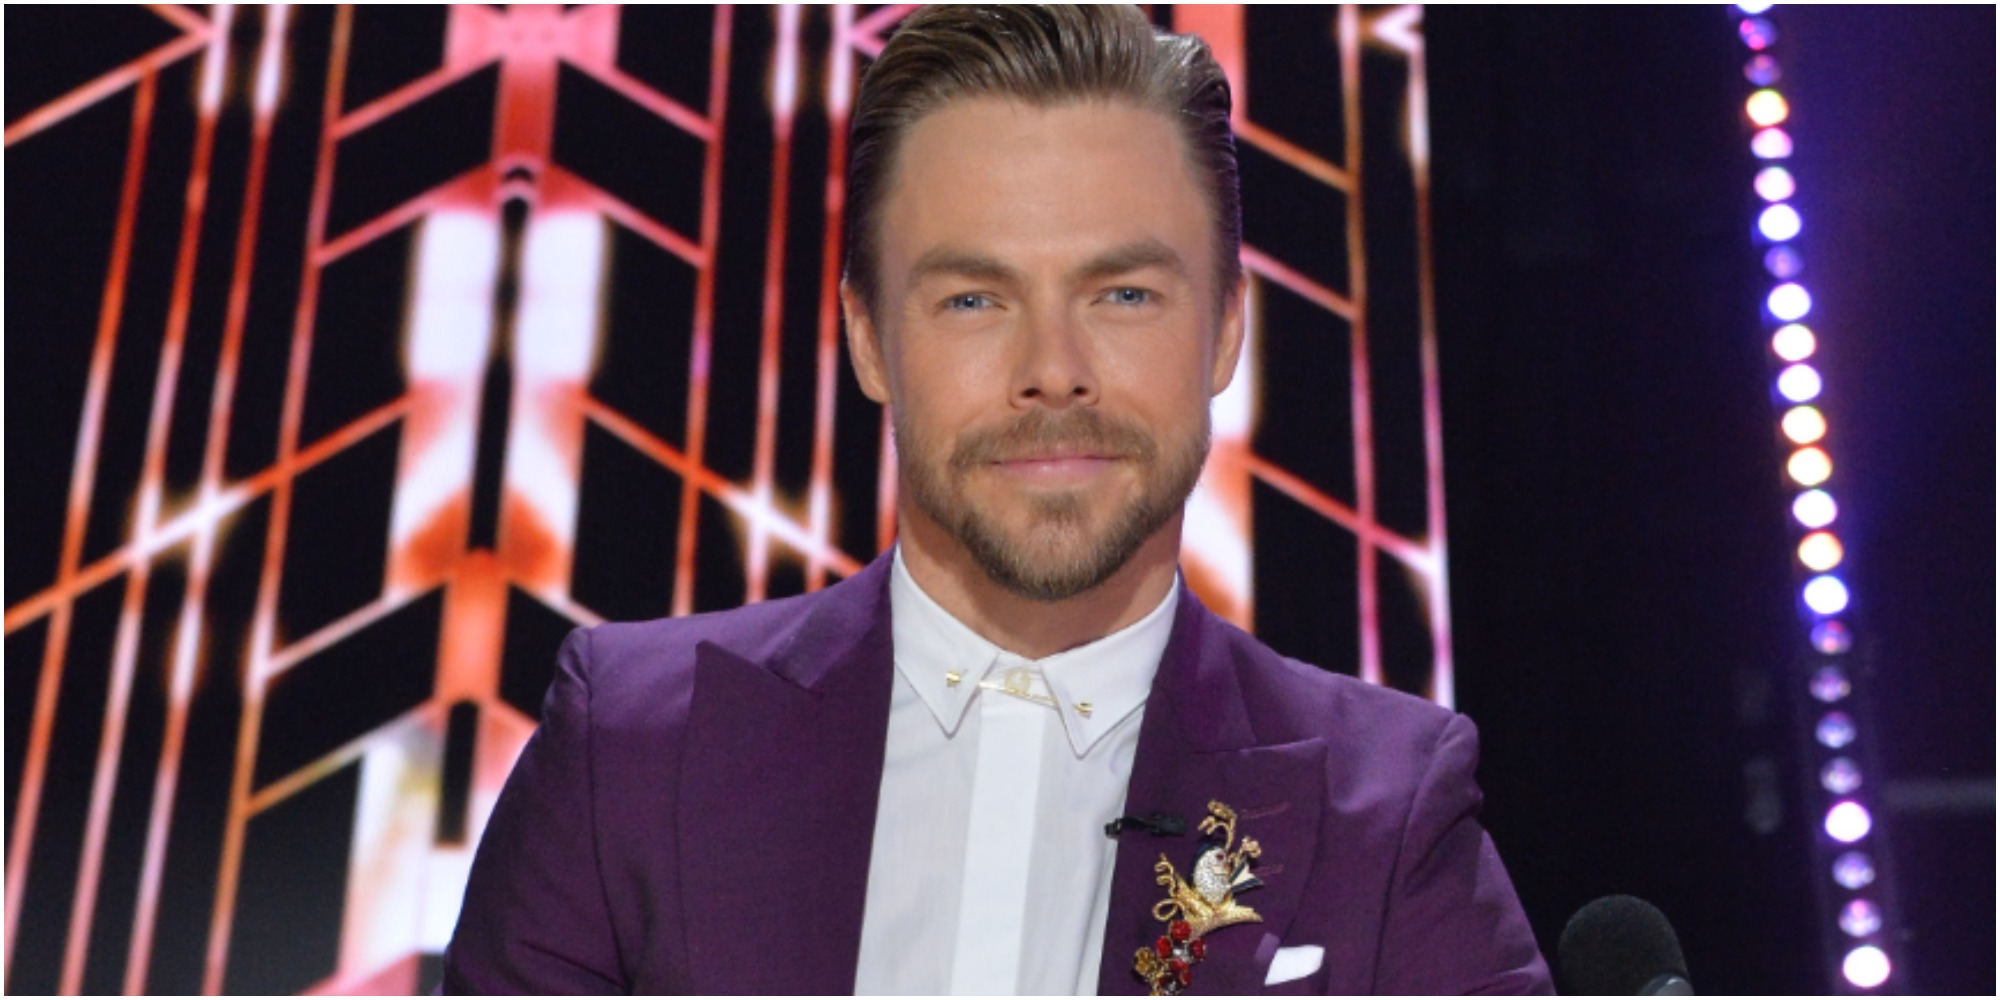 Derek Hough poses on the set of "Dancing with the Stars."